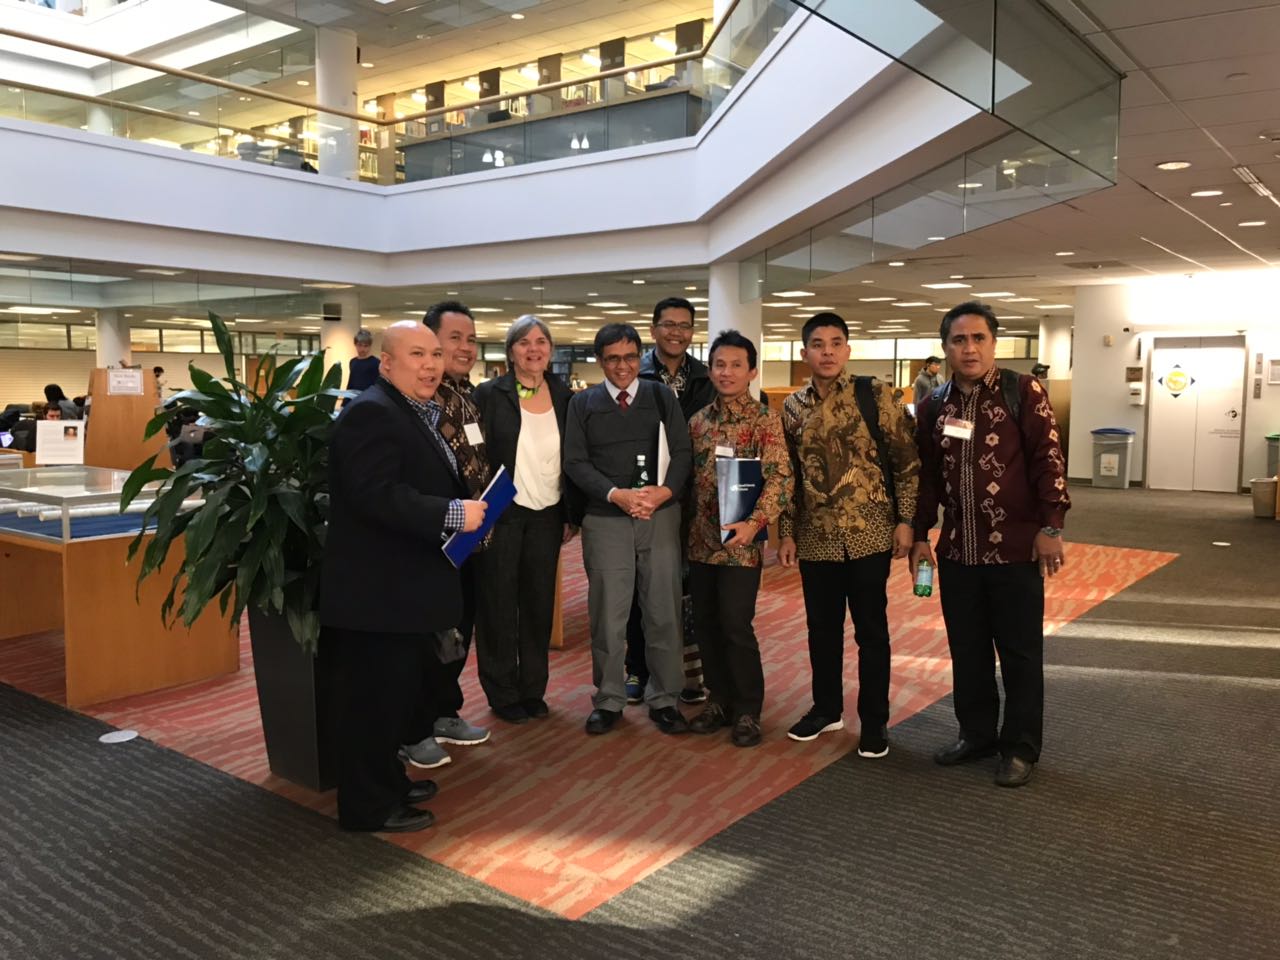 Seven men and one woman pose for a photo in the first floor of the W. W. Hagerty Library.